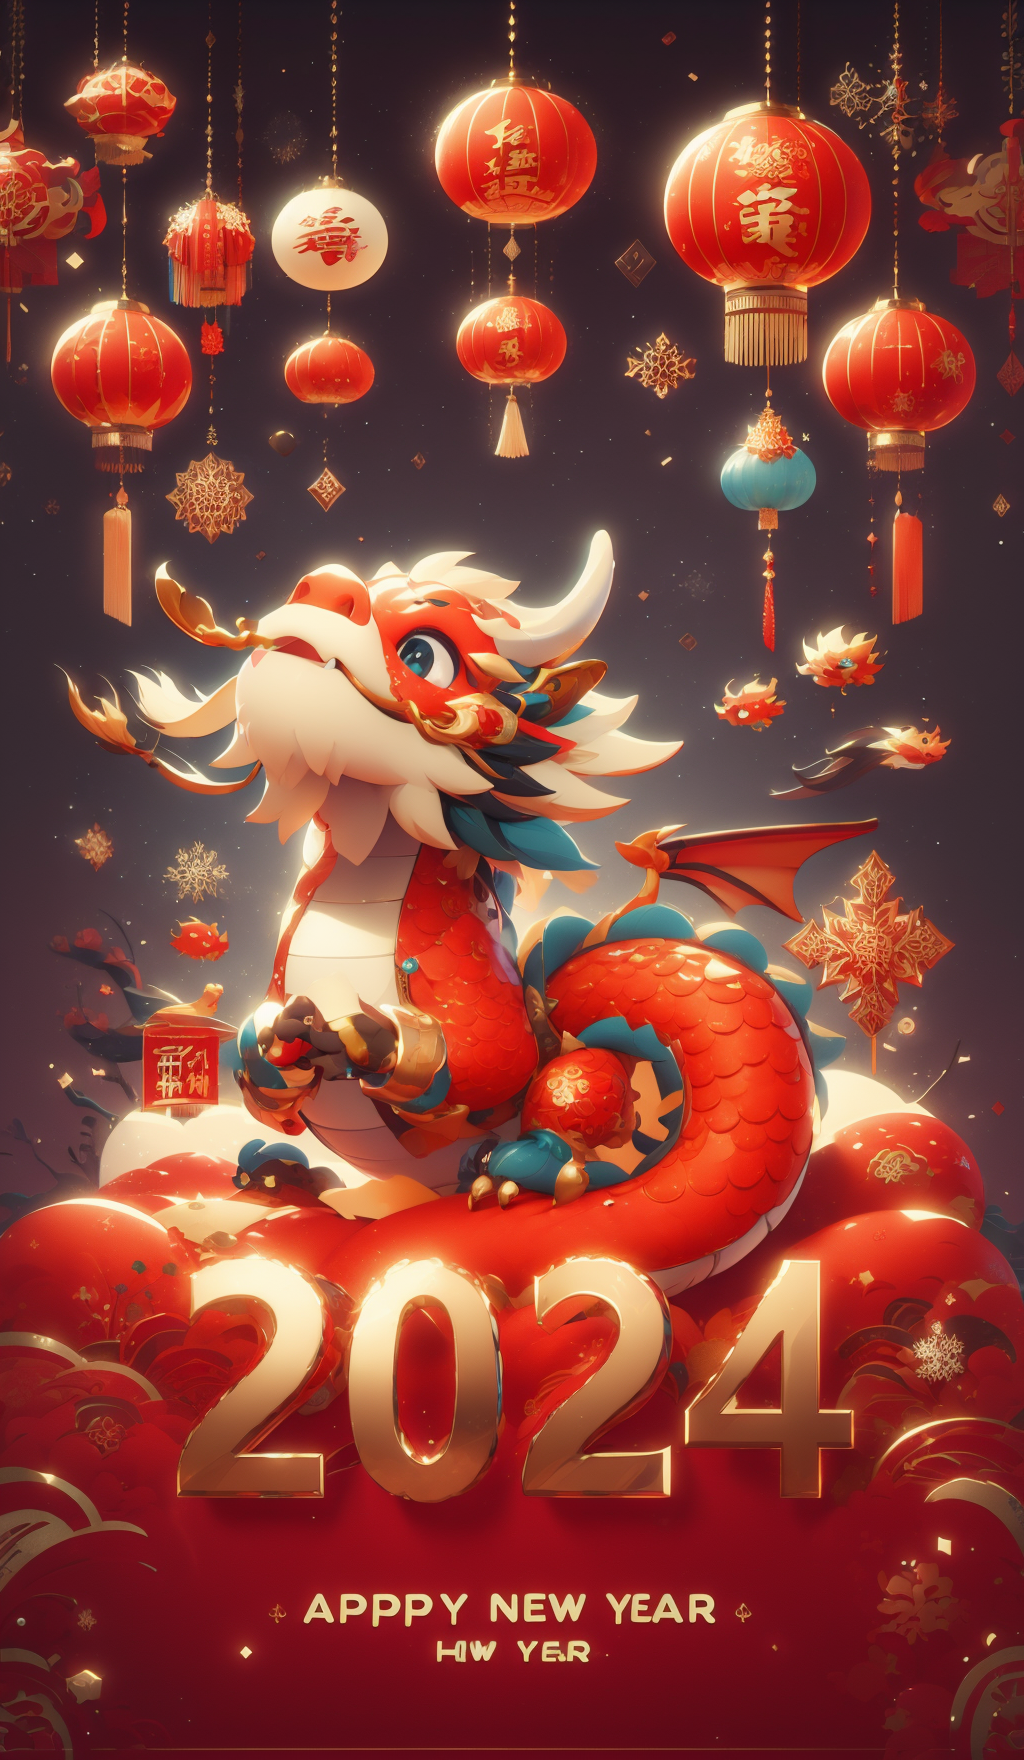 00358-3927416437-new year,dragon,(snowflakes_0.8),absurdres,cover,8k,poster style,3D effect,_lora_new_year_v1.0_0.6_,_lora_newyear_dragon_V1.0_0.png